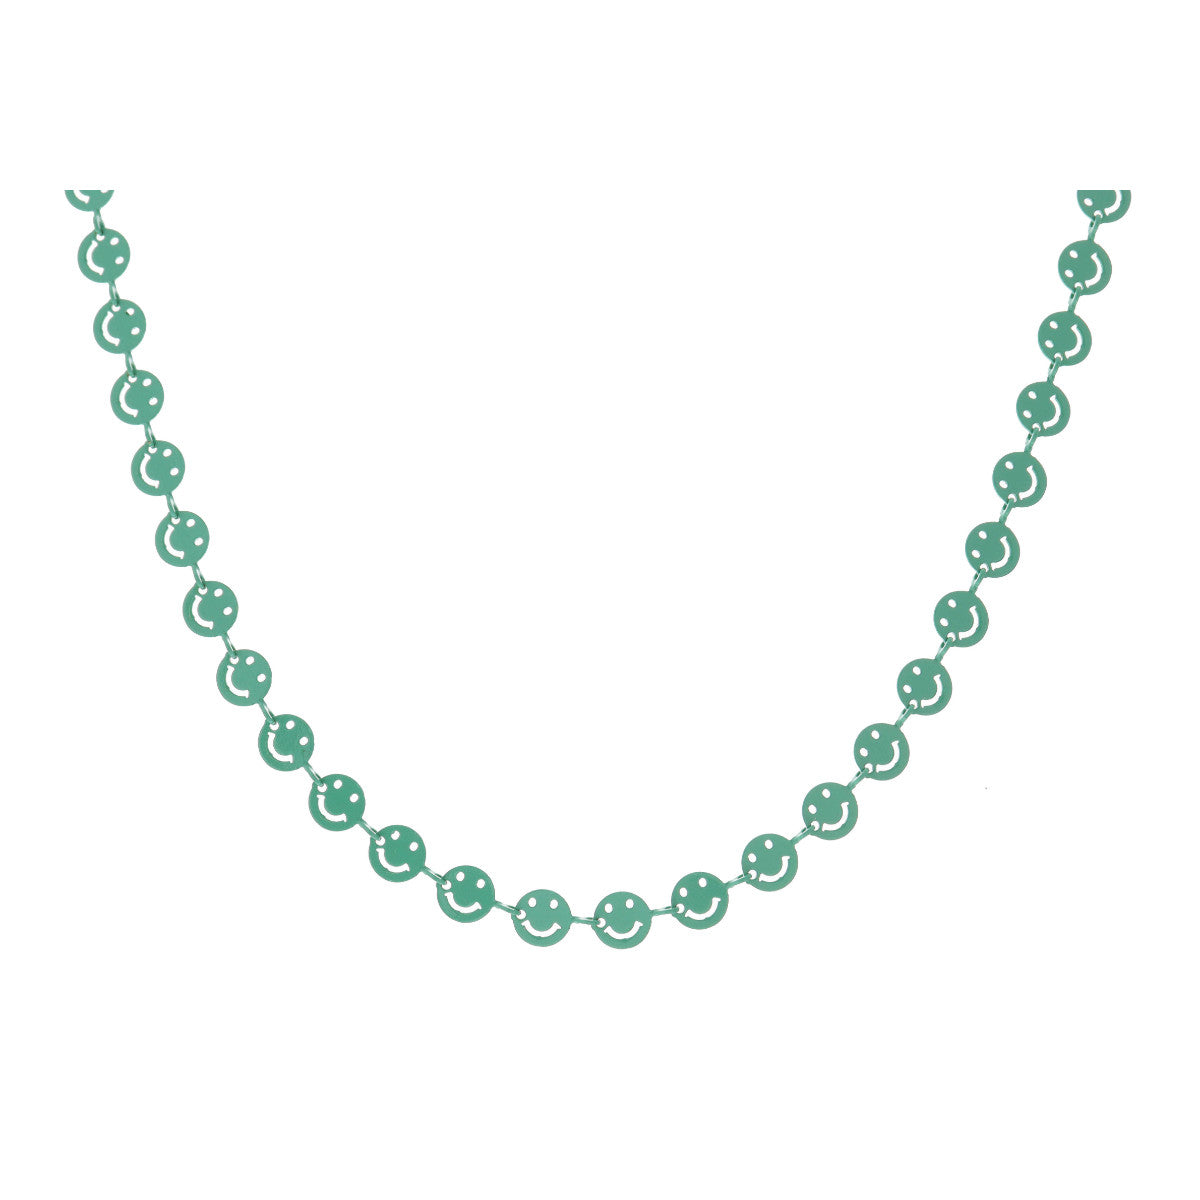 14" TEAL METAL HAPPY FACE NECKLACE